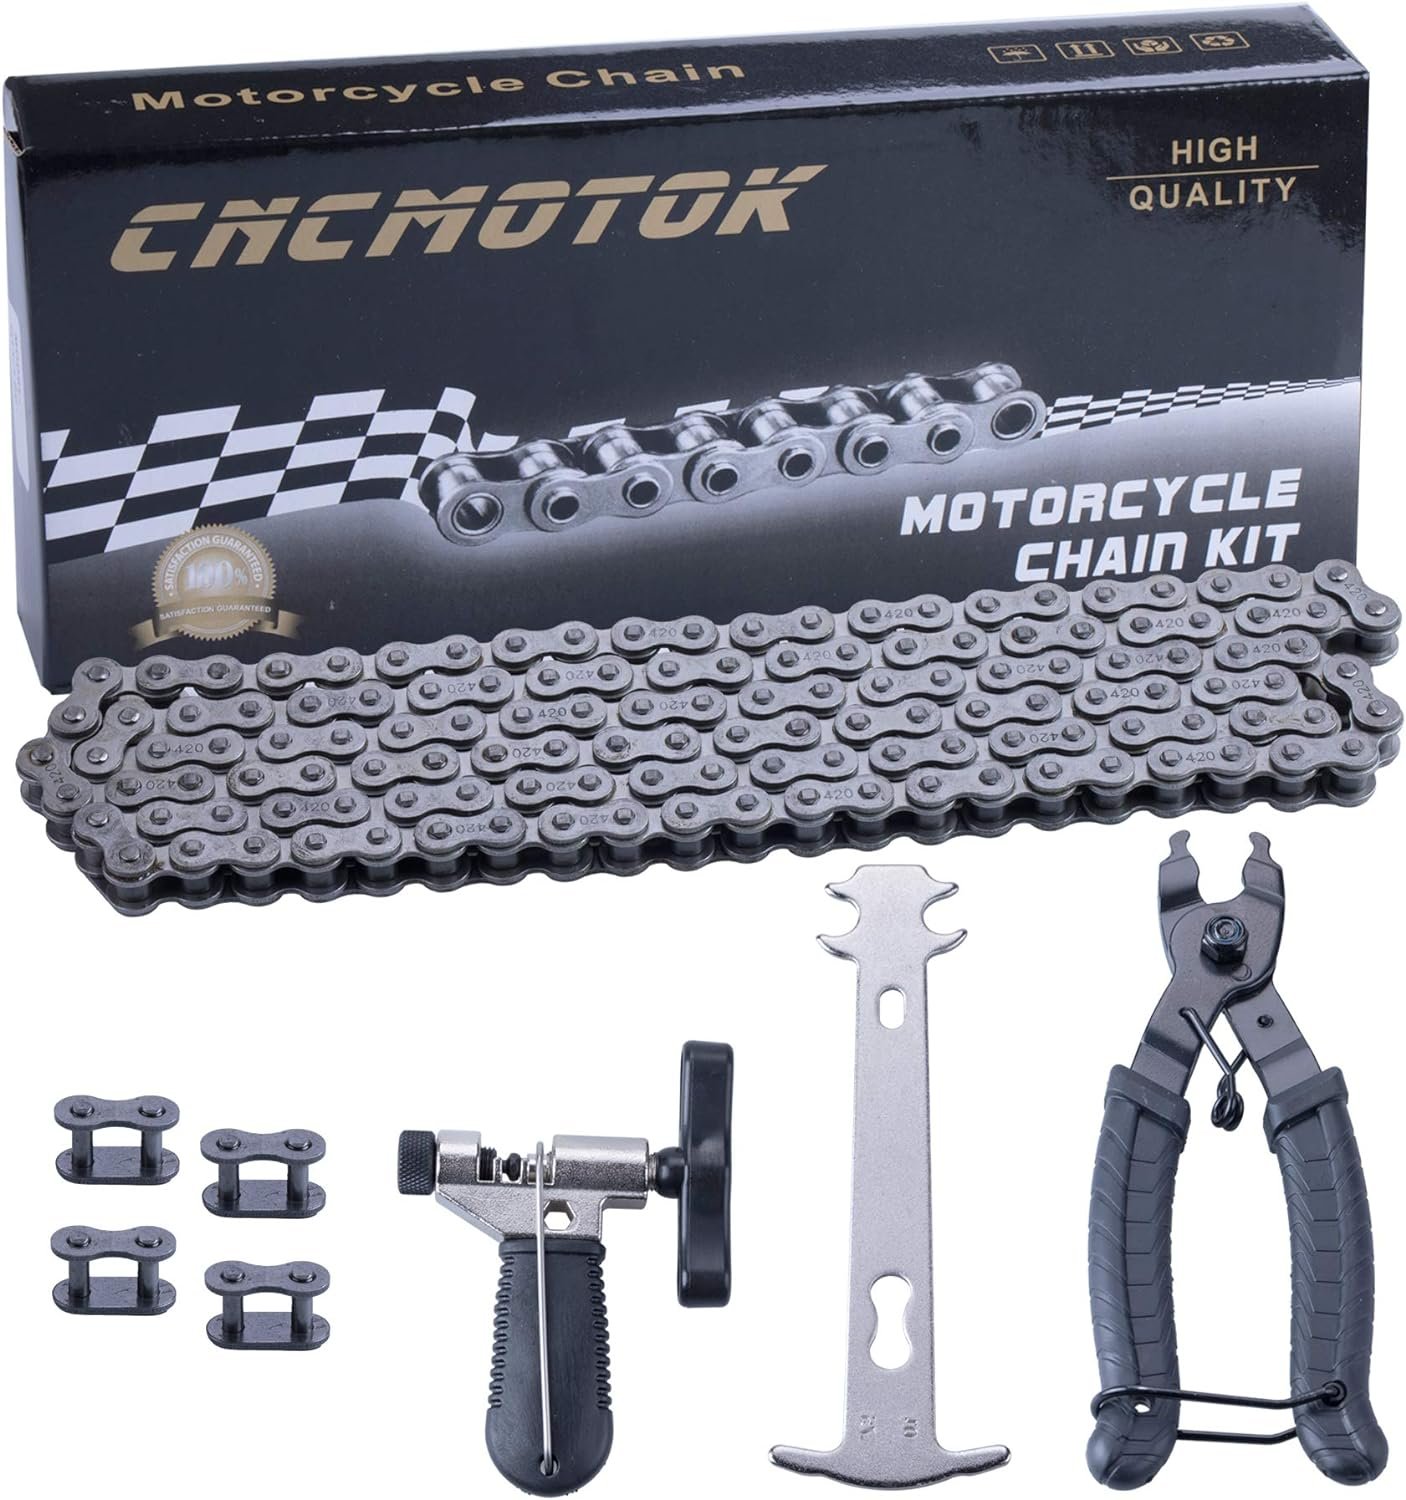 CNCMOTOK 420 Motorcycle Chain Review